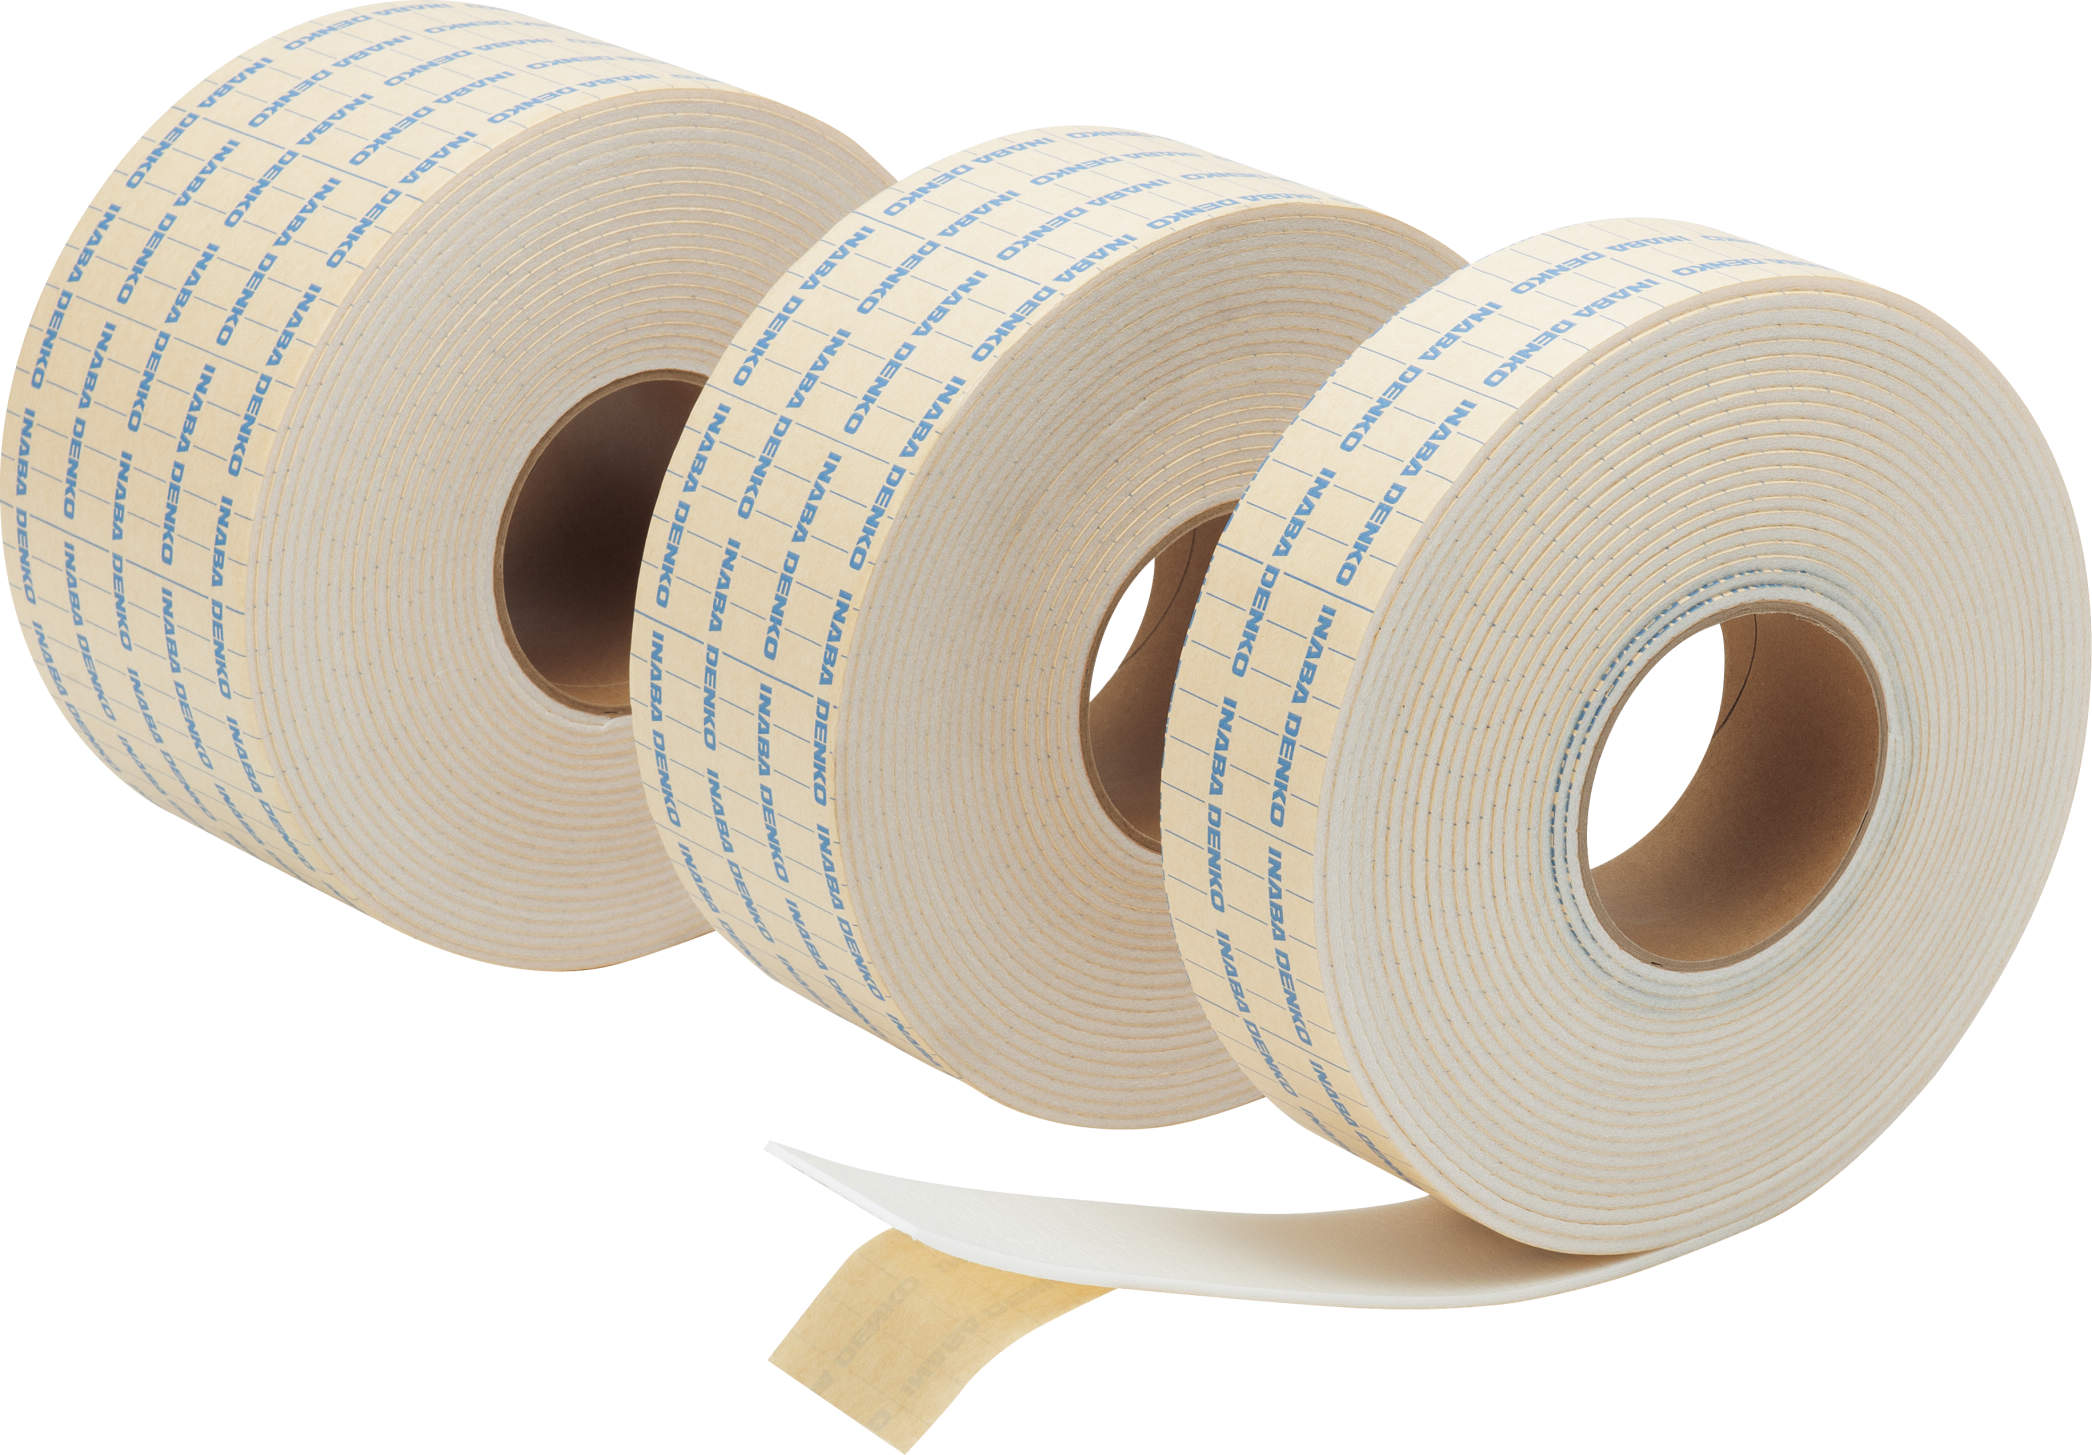 【DHV】INSULATED ADHESIVE TAPE